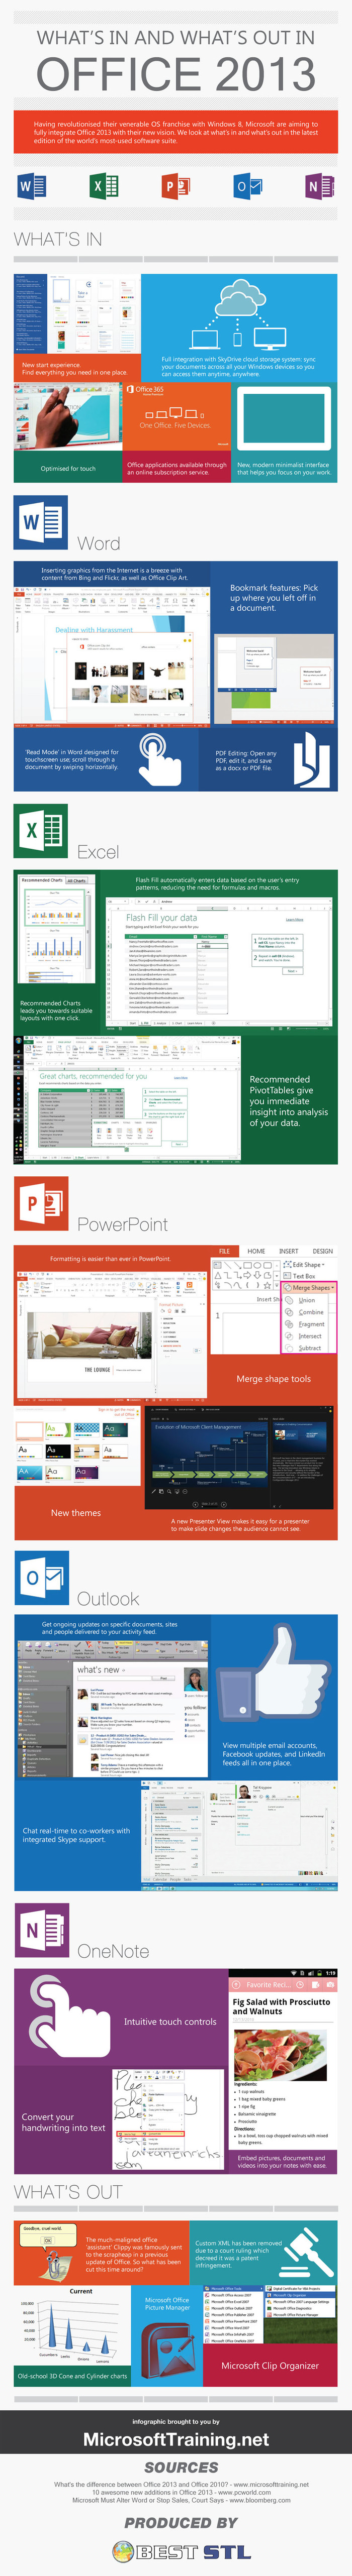 Office 2013 infographic